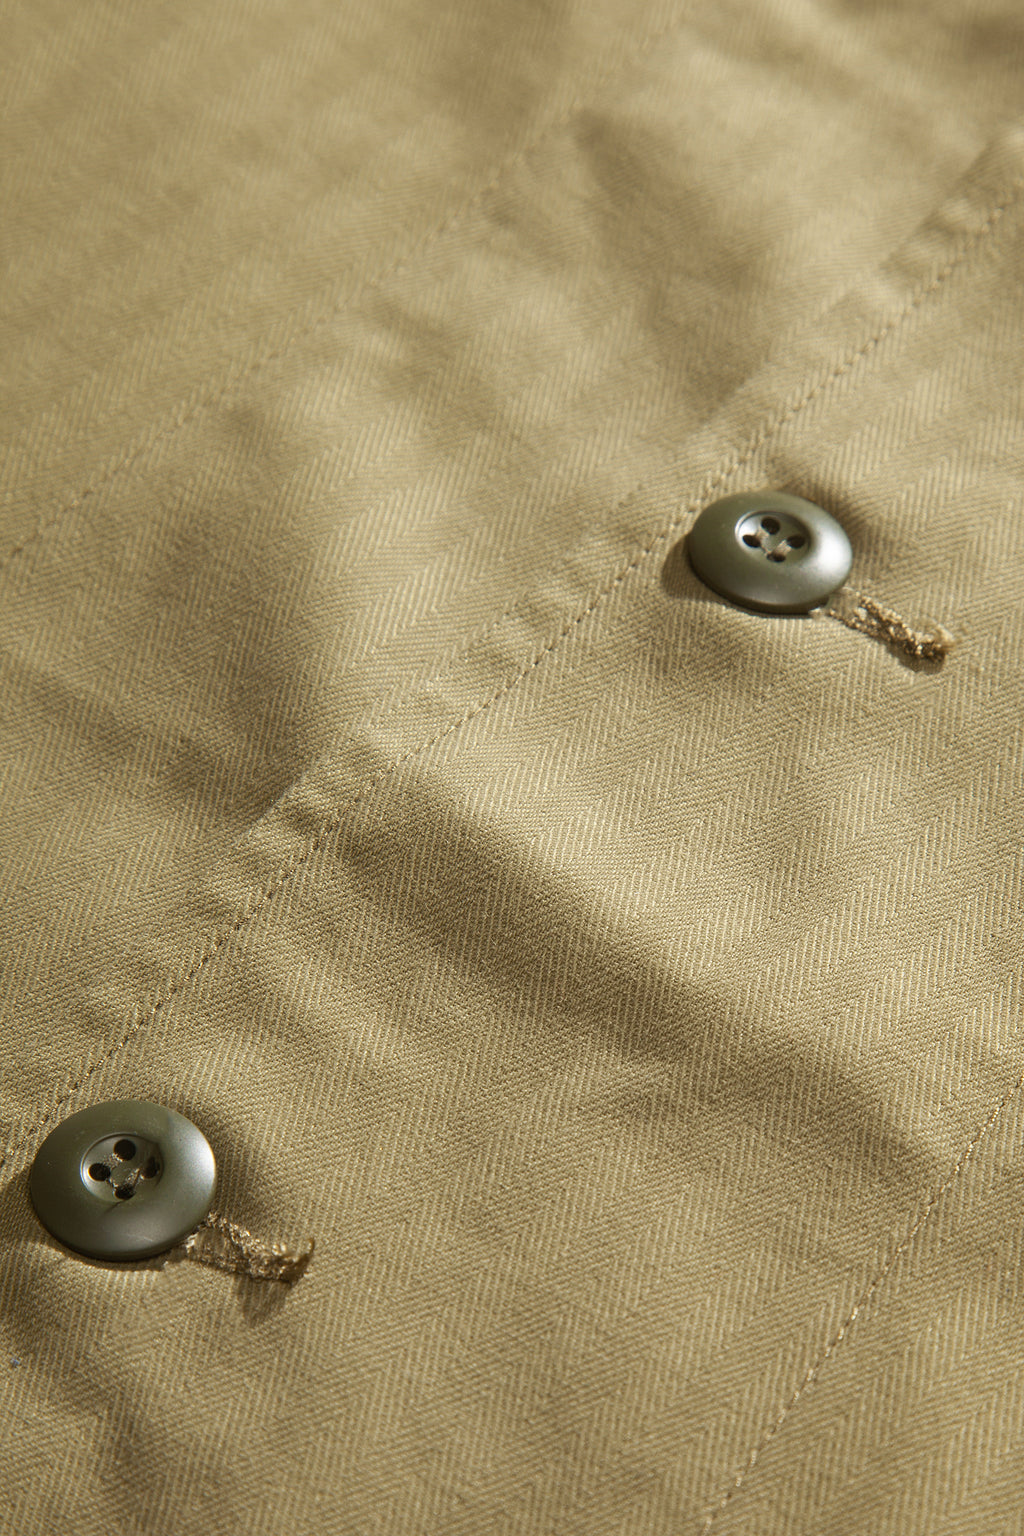 Red Ruggison - Twill Military Work Jacket - Olive